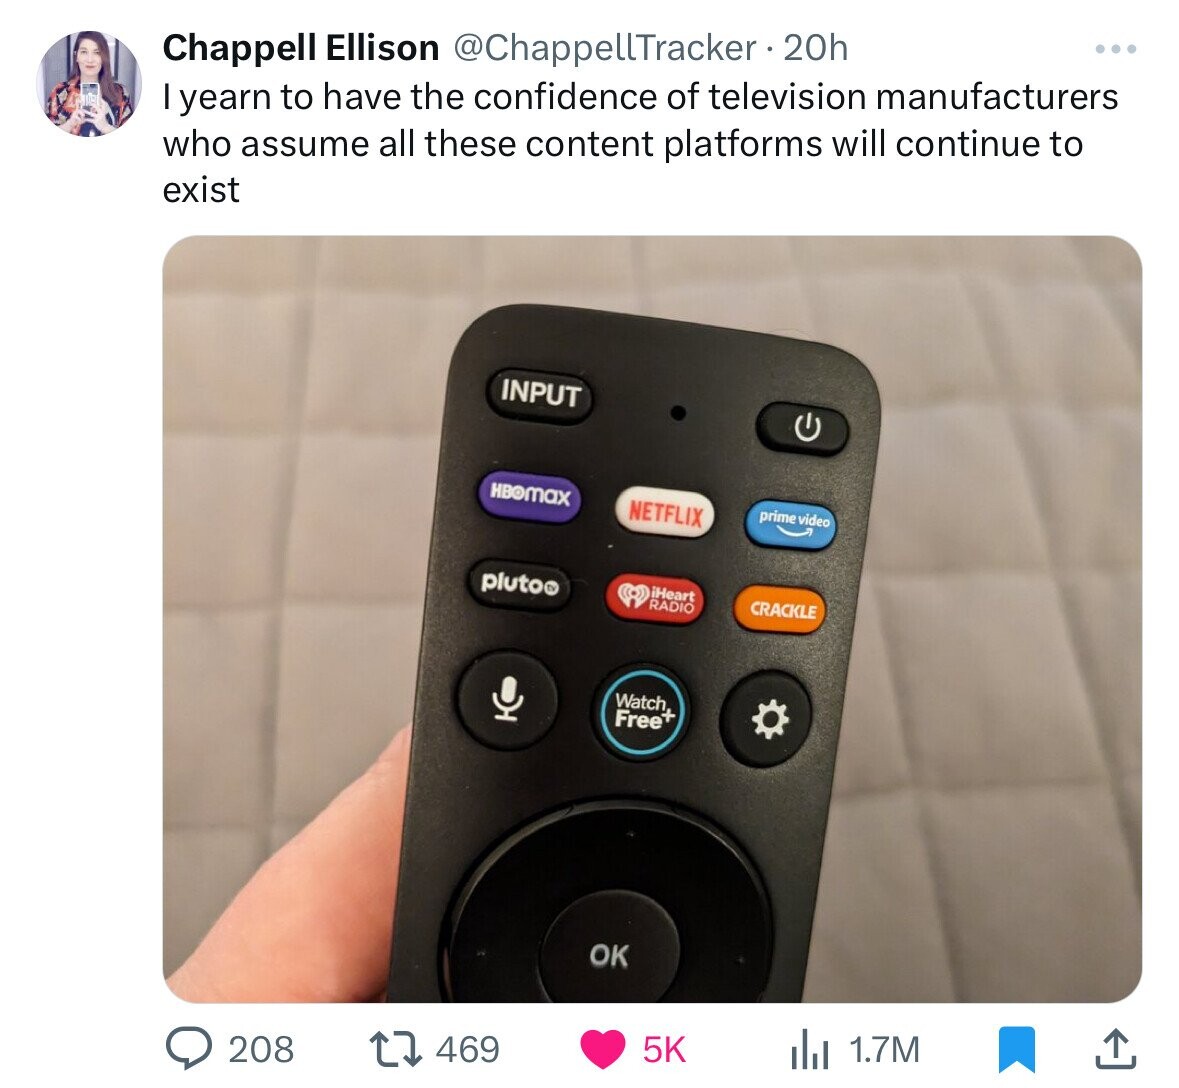 electronics - Chappell Ellison 20h I yearn to have the confidence of television manufacturers who assume all these content platforms will continue to exist 208 Input HBOmax plutoo t 469 Netflix Ok Radio Watch Free 5K G prime video Crackle 1.7M